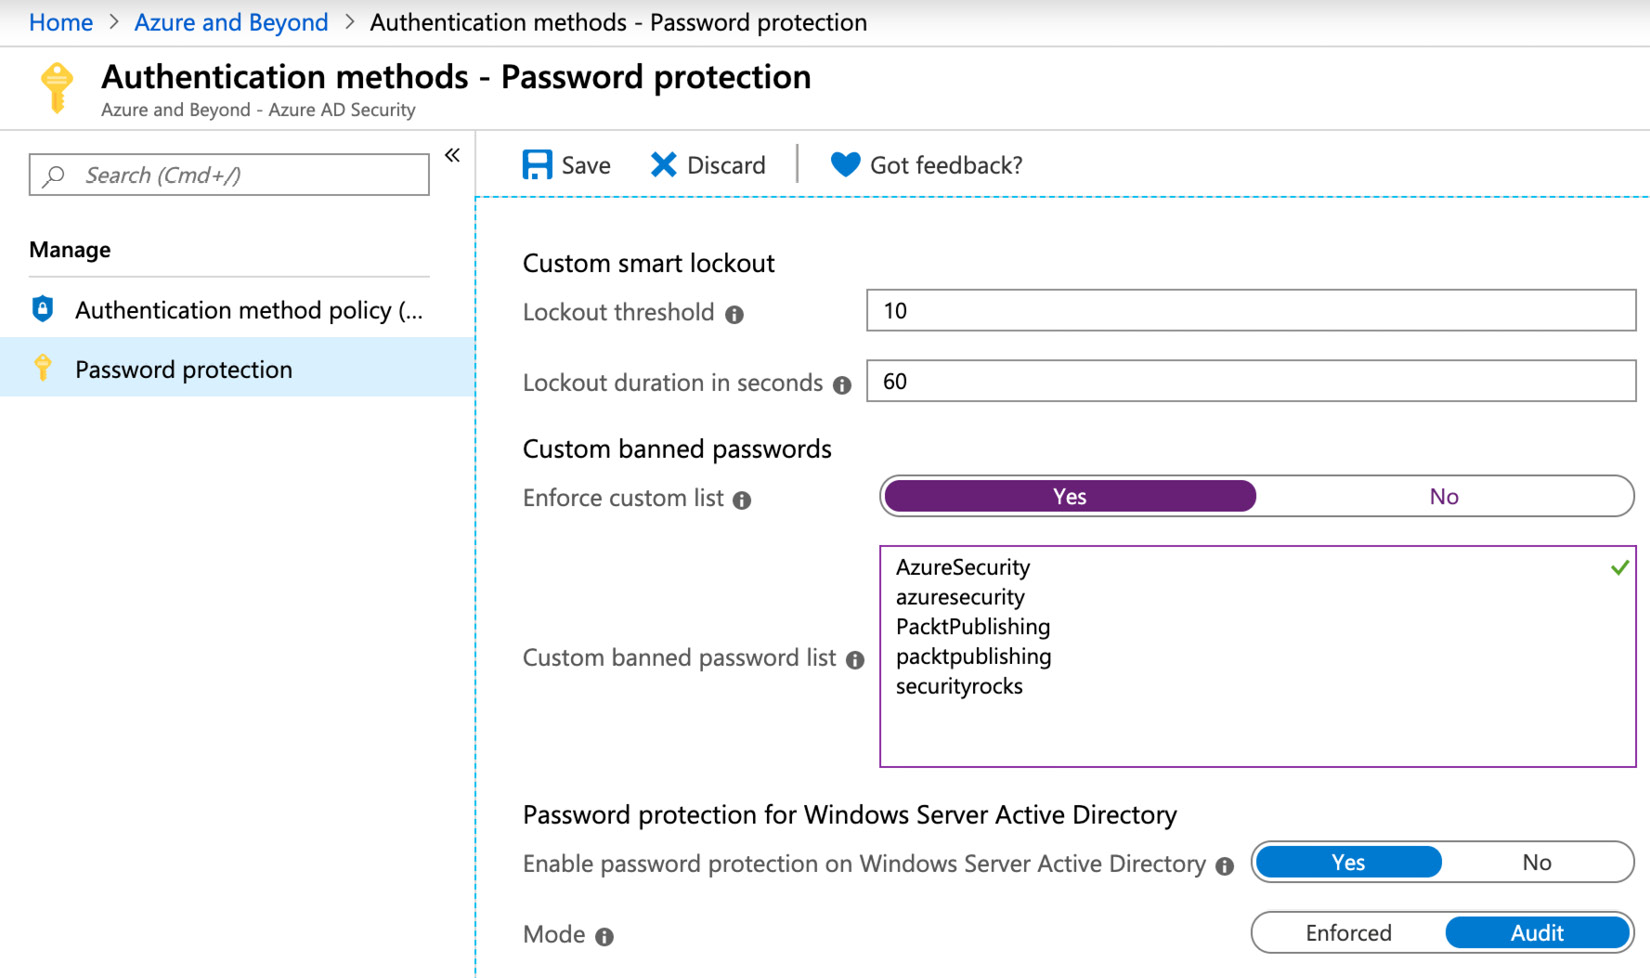 Figure. 3.1 - Configuration of a custom banned password list in Azure AD
